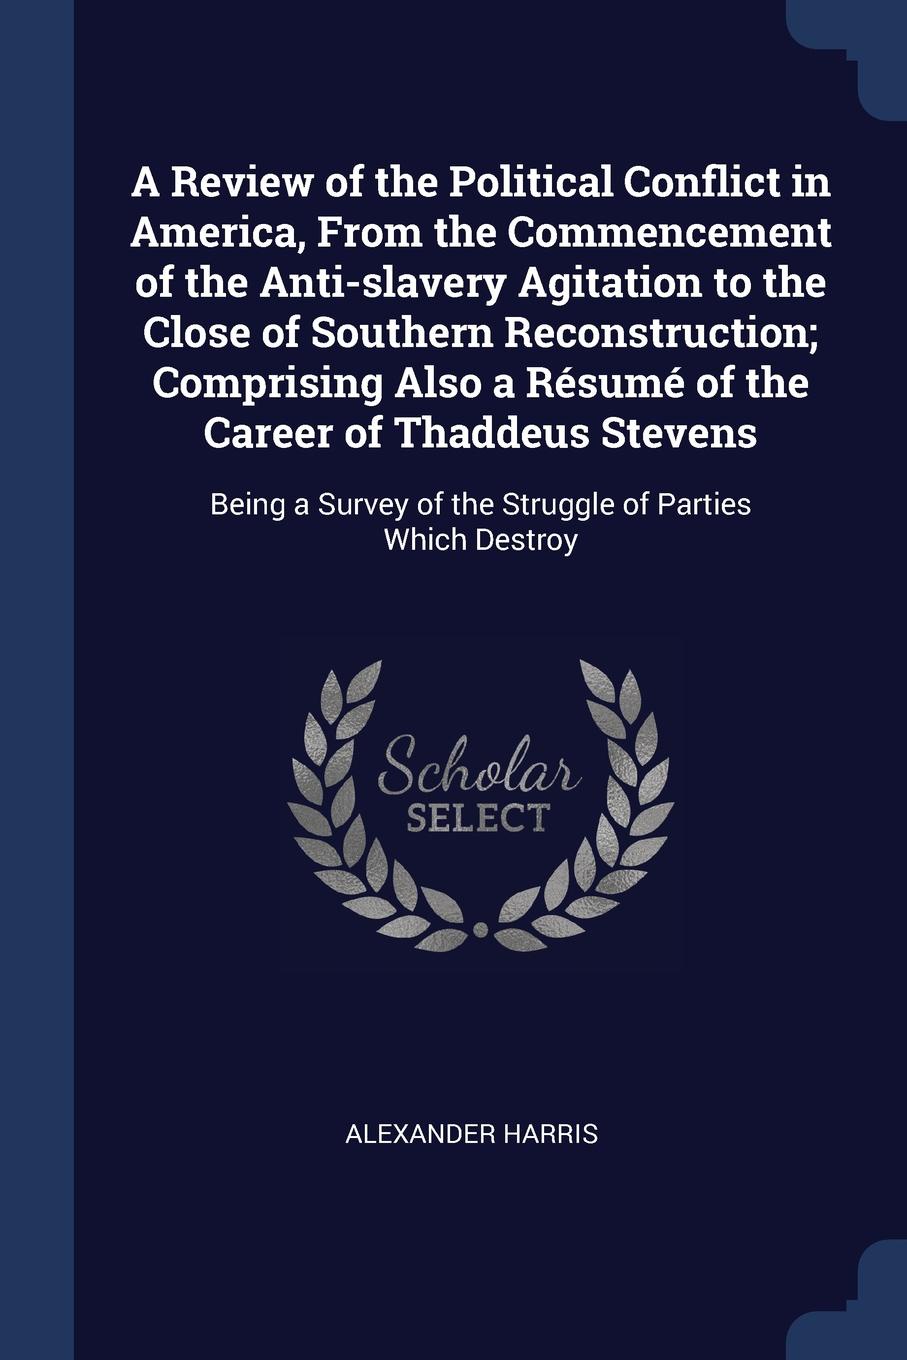 A Review of the Political Conflict in America, From the Commencement of the Anti-slavery Agitation to the Close of Southern Reconstruction; Comprising Also a Resume of the Career of Thaddeus Stevens. Being a Survey of the Struggle of Parties Which...